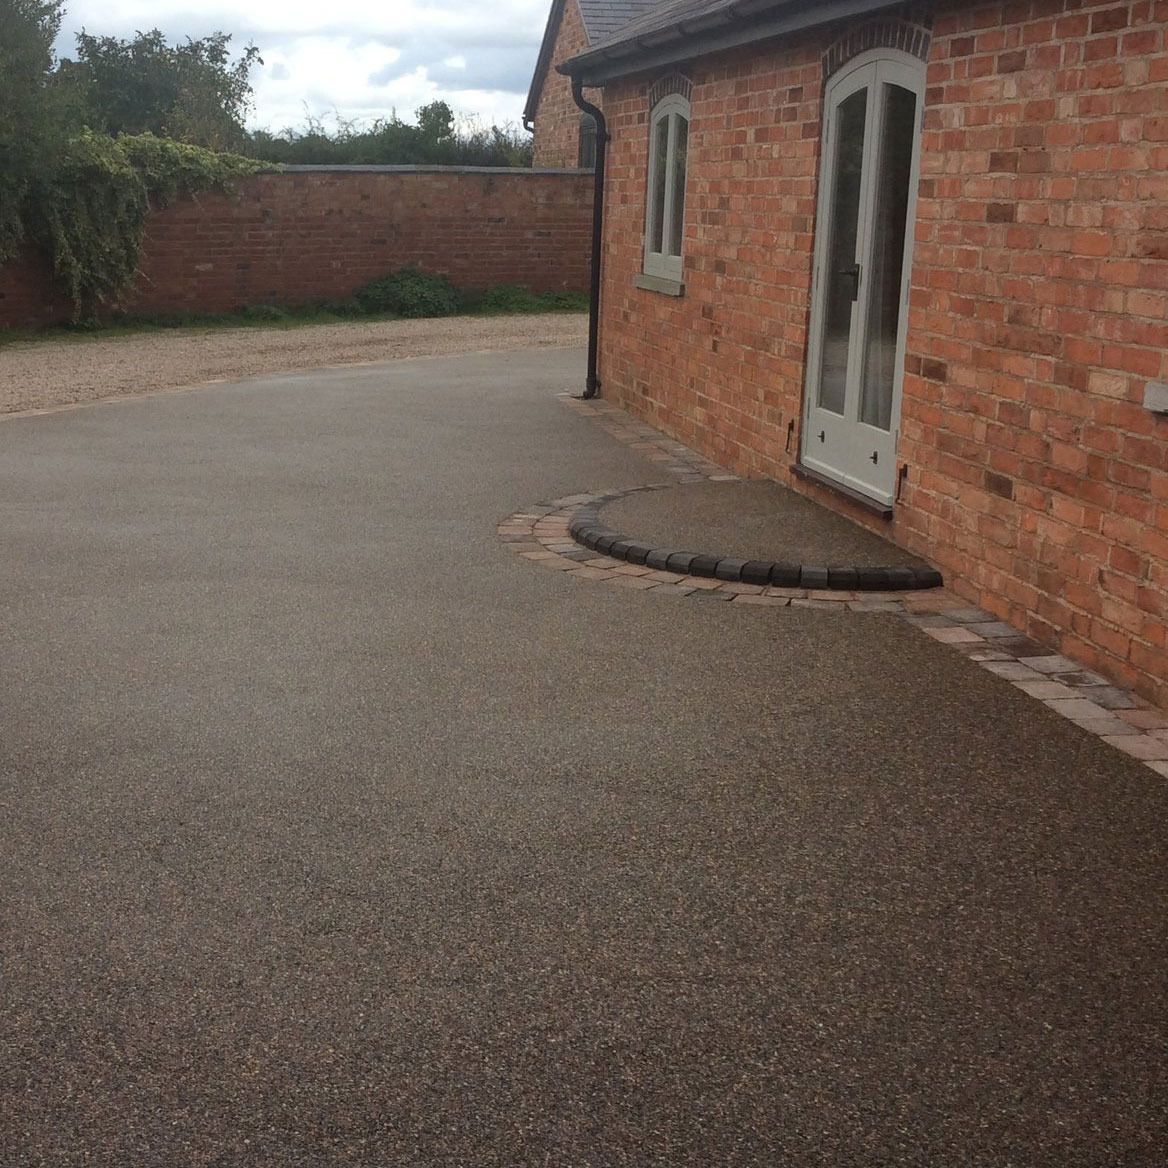 Resin Bound Driveway - Olympus Colour